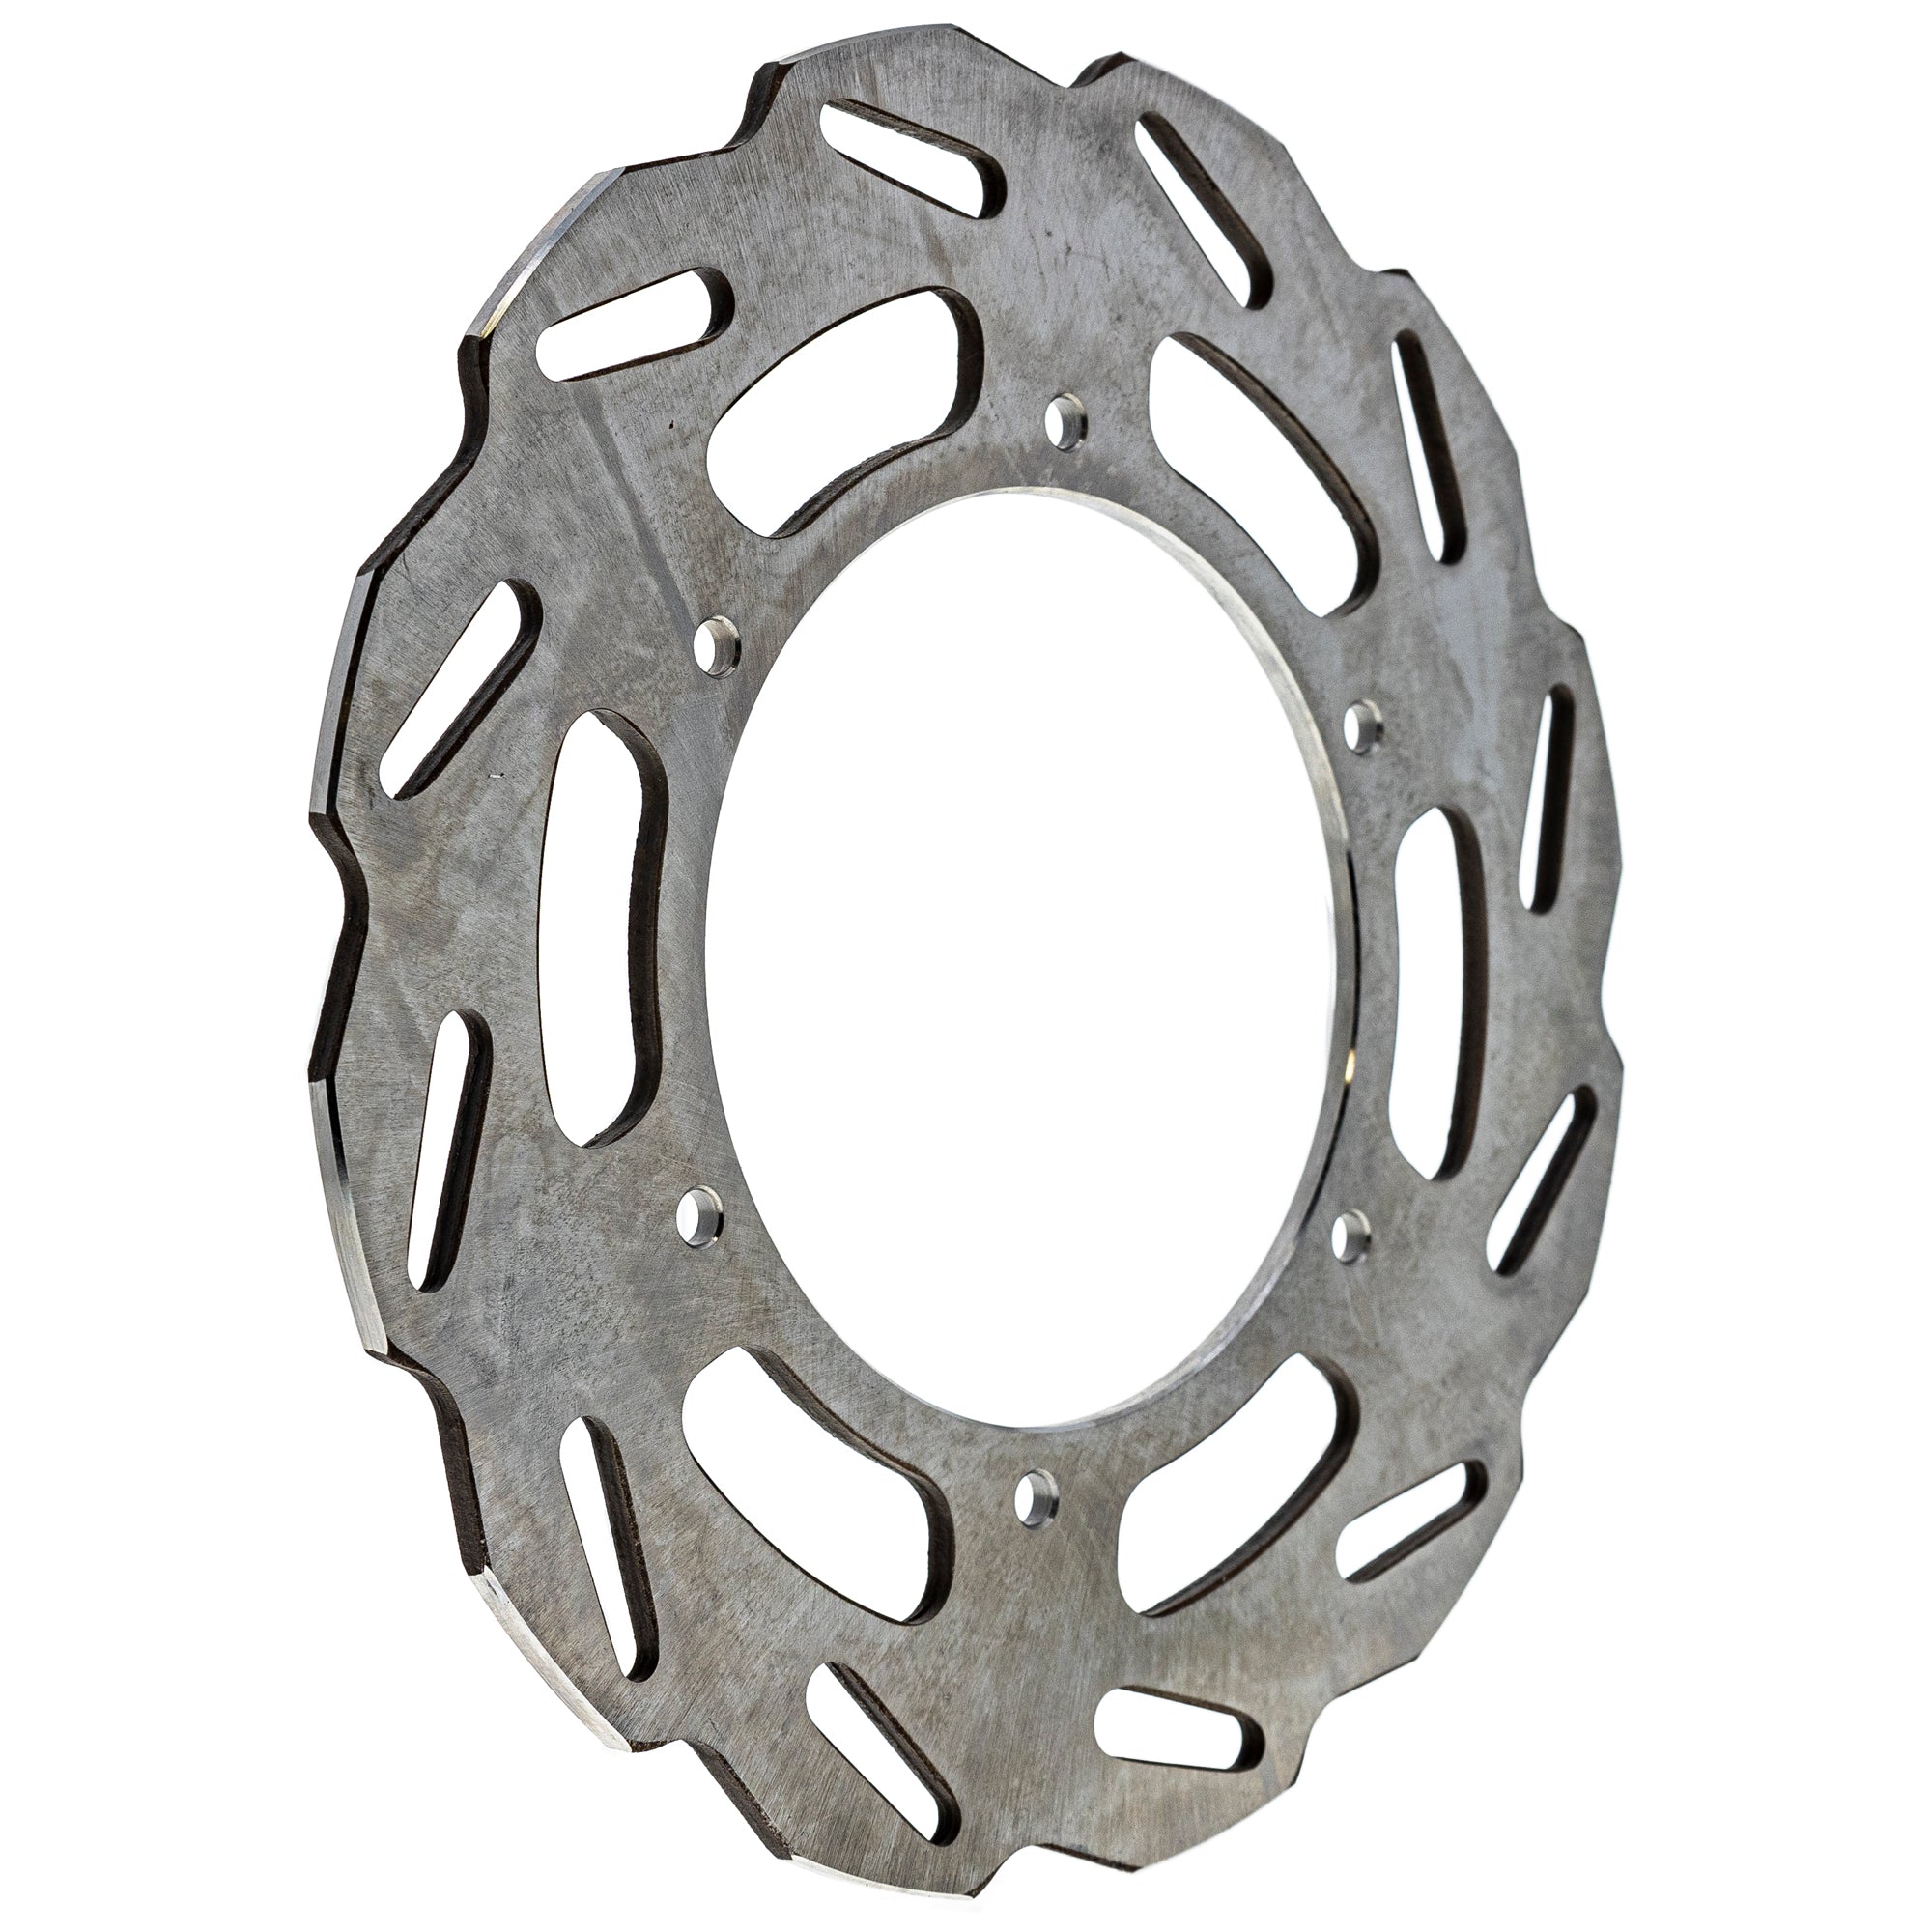 Rear Brake Rotor 519-CRT2332R For Yamaha 3D7-2582W-02-00 3D7-2582W-01-00 3D7-2581T-12-00